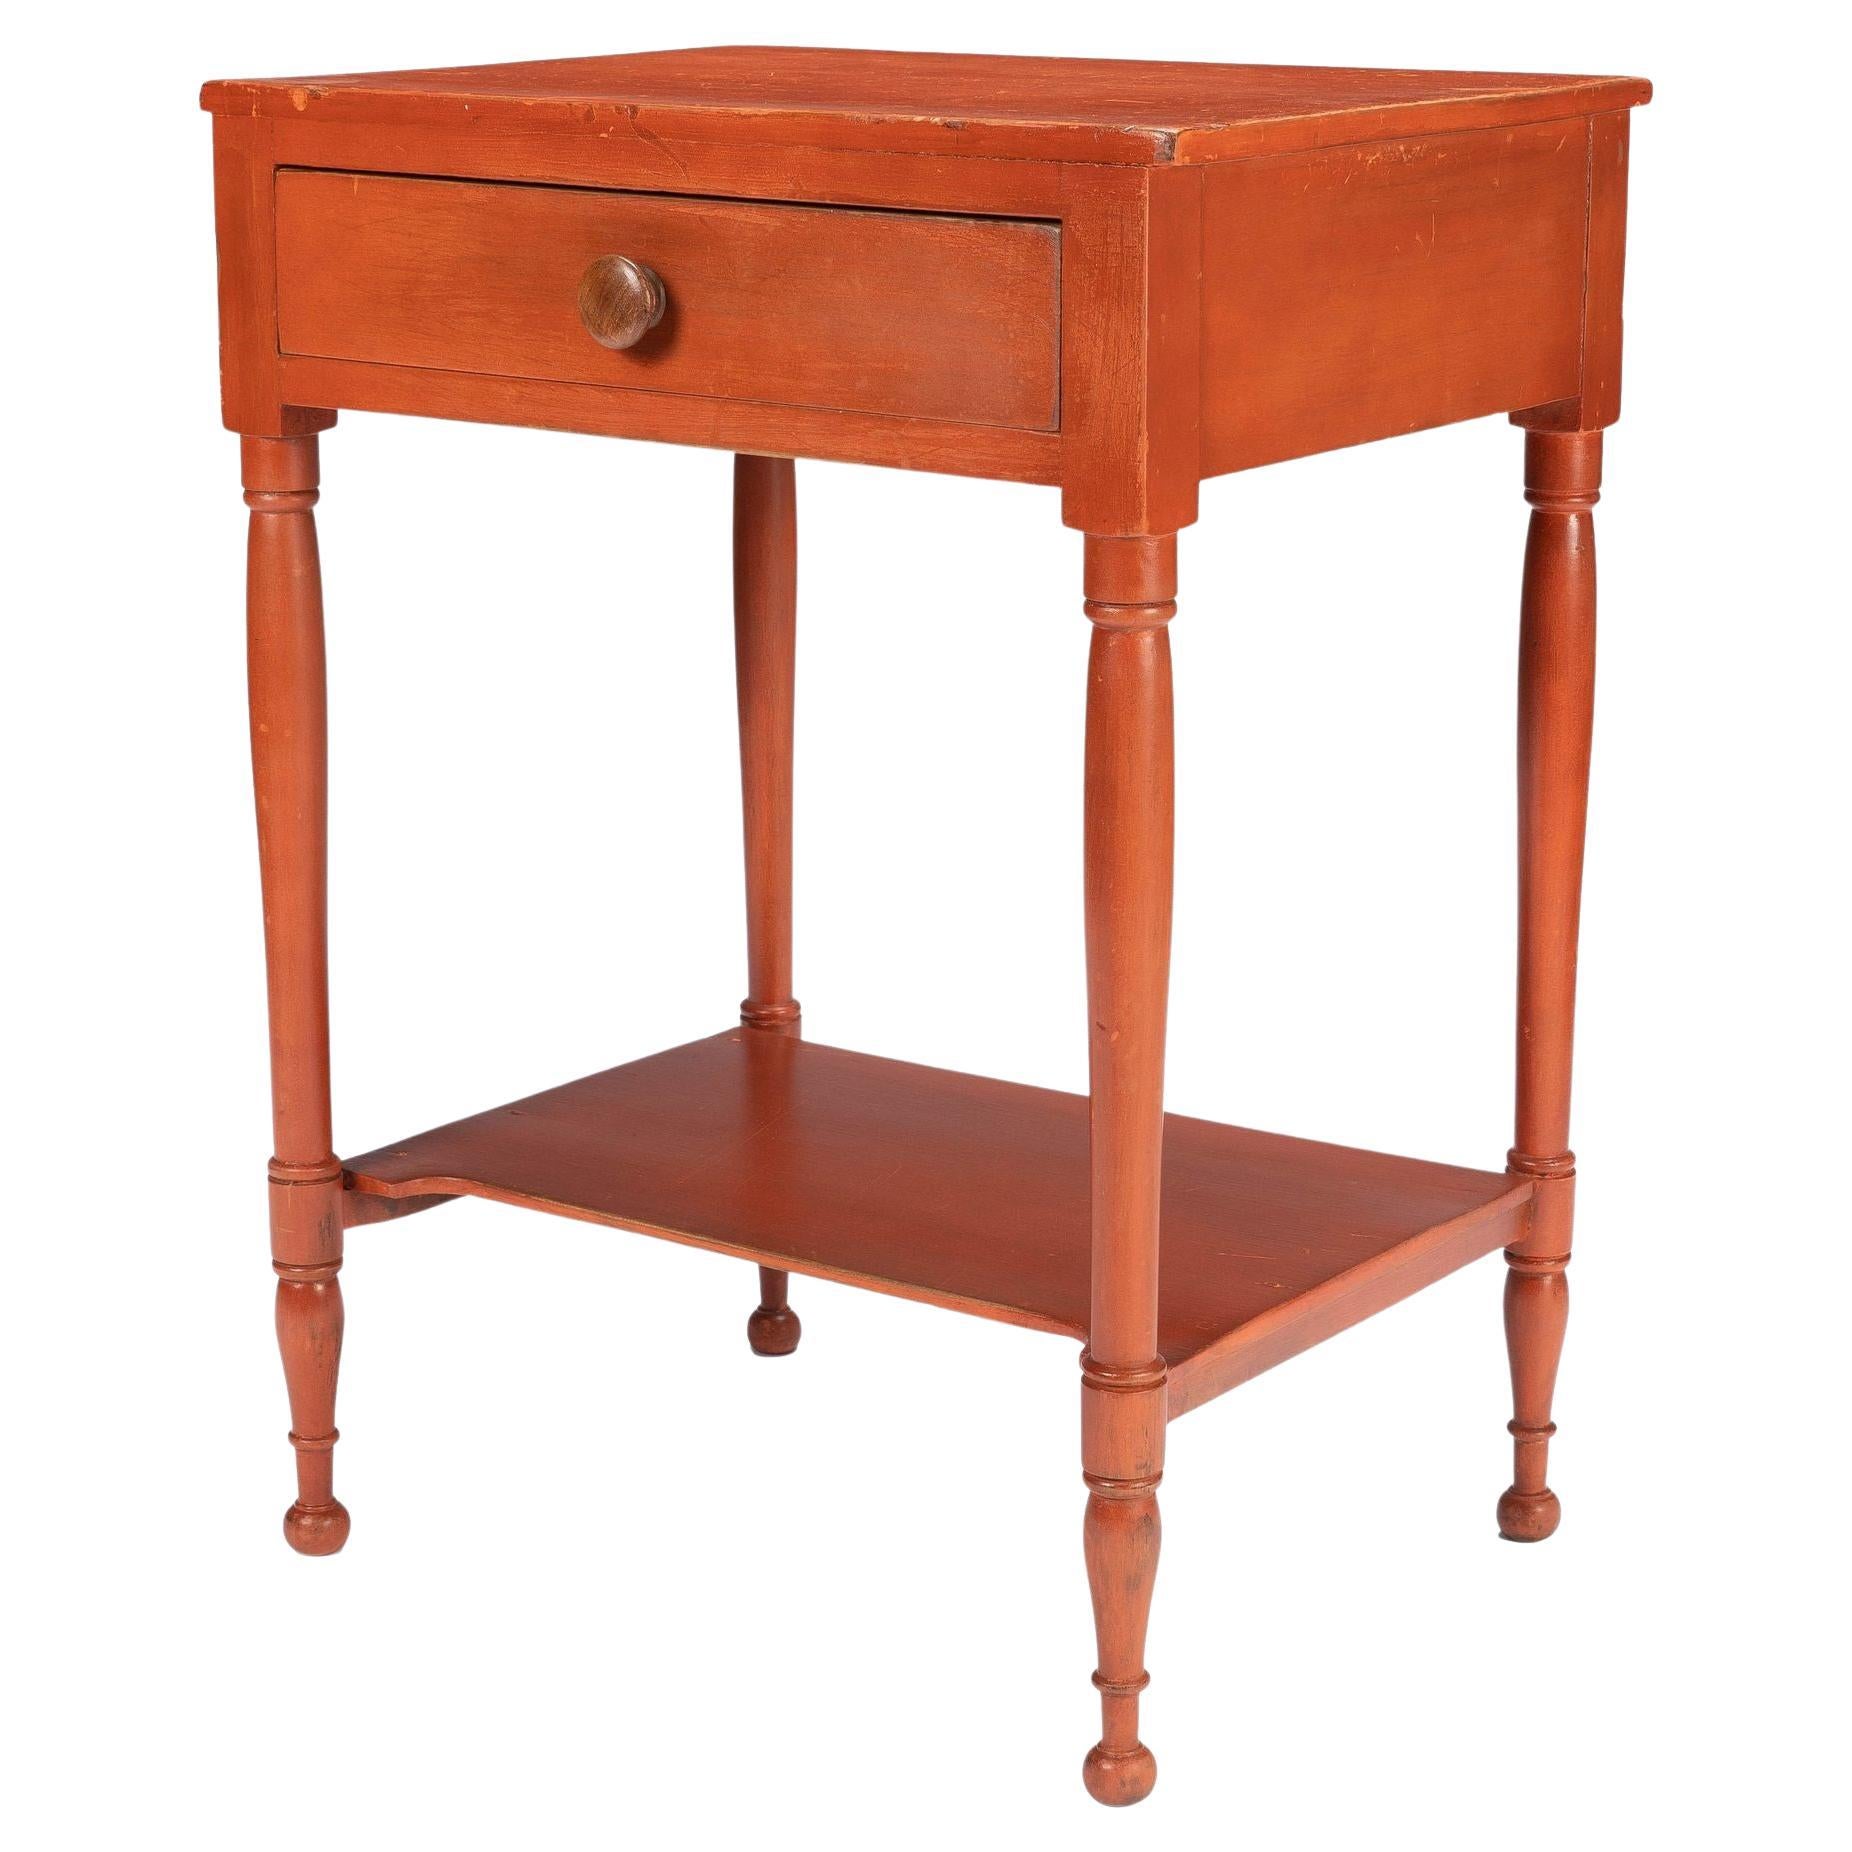 Pennsylvania Sheraton Oxide Stained One Drawer Stand with Stretcher Shelf '1820' For Sale